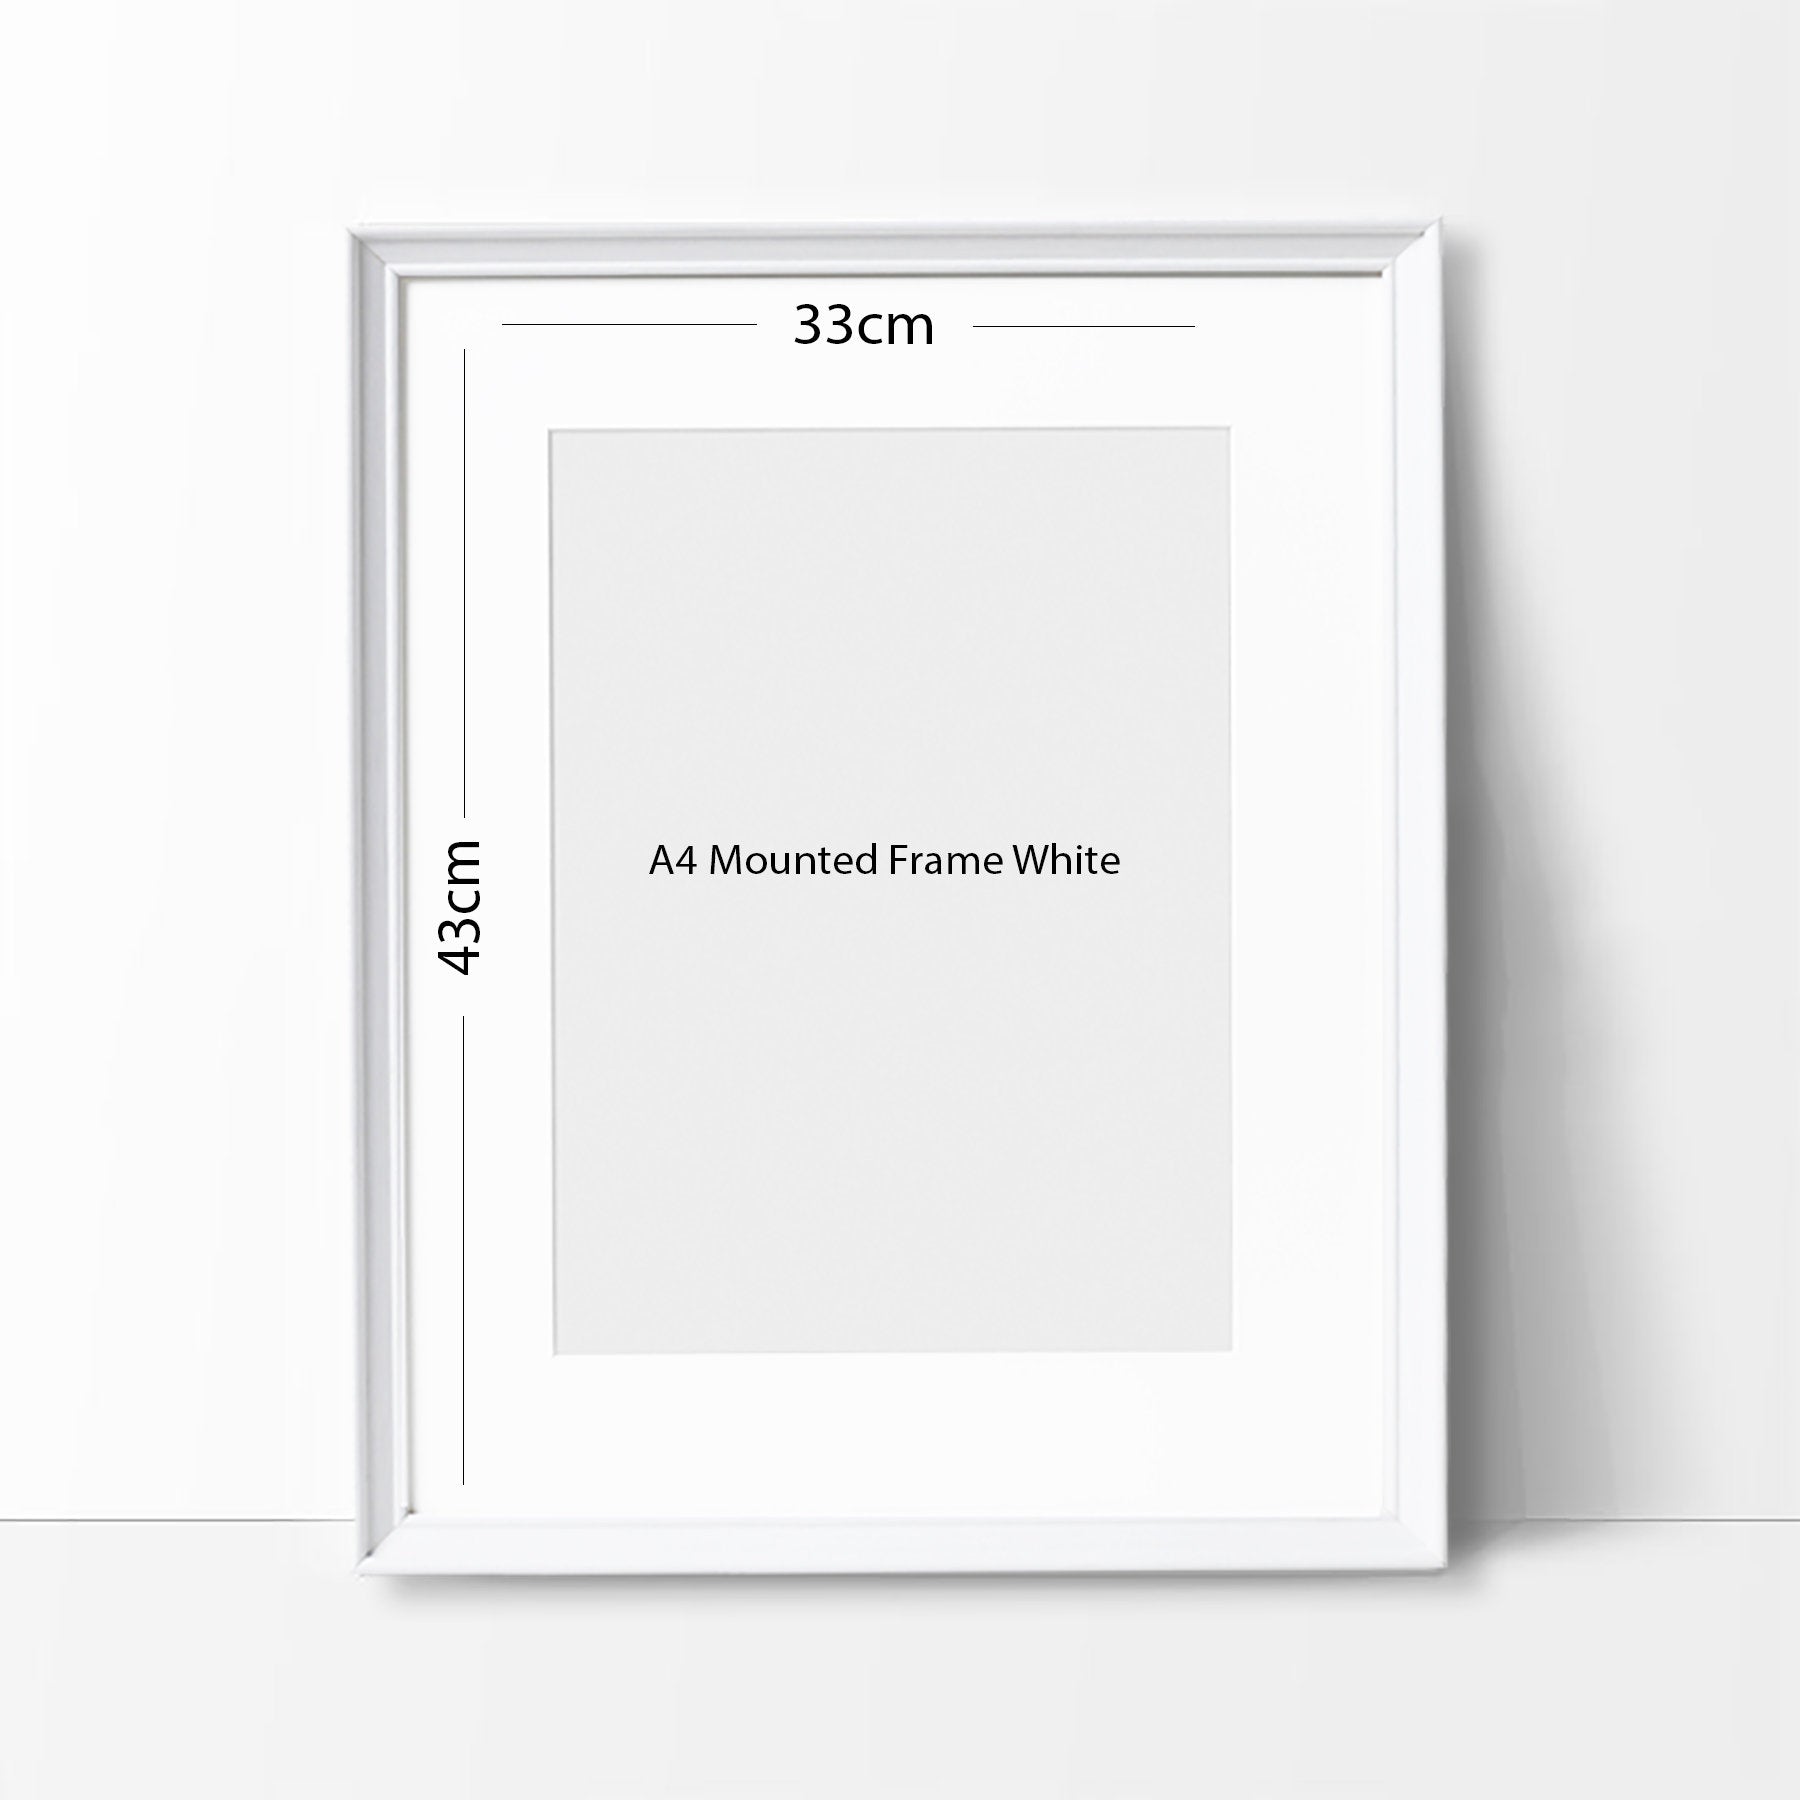 Olaf | Minimalist Watercolor Art Print Poster Gift Idea For Him Or Her |